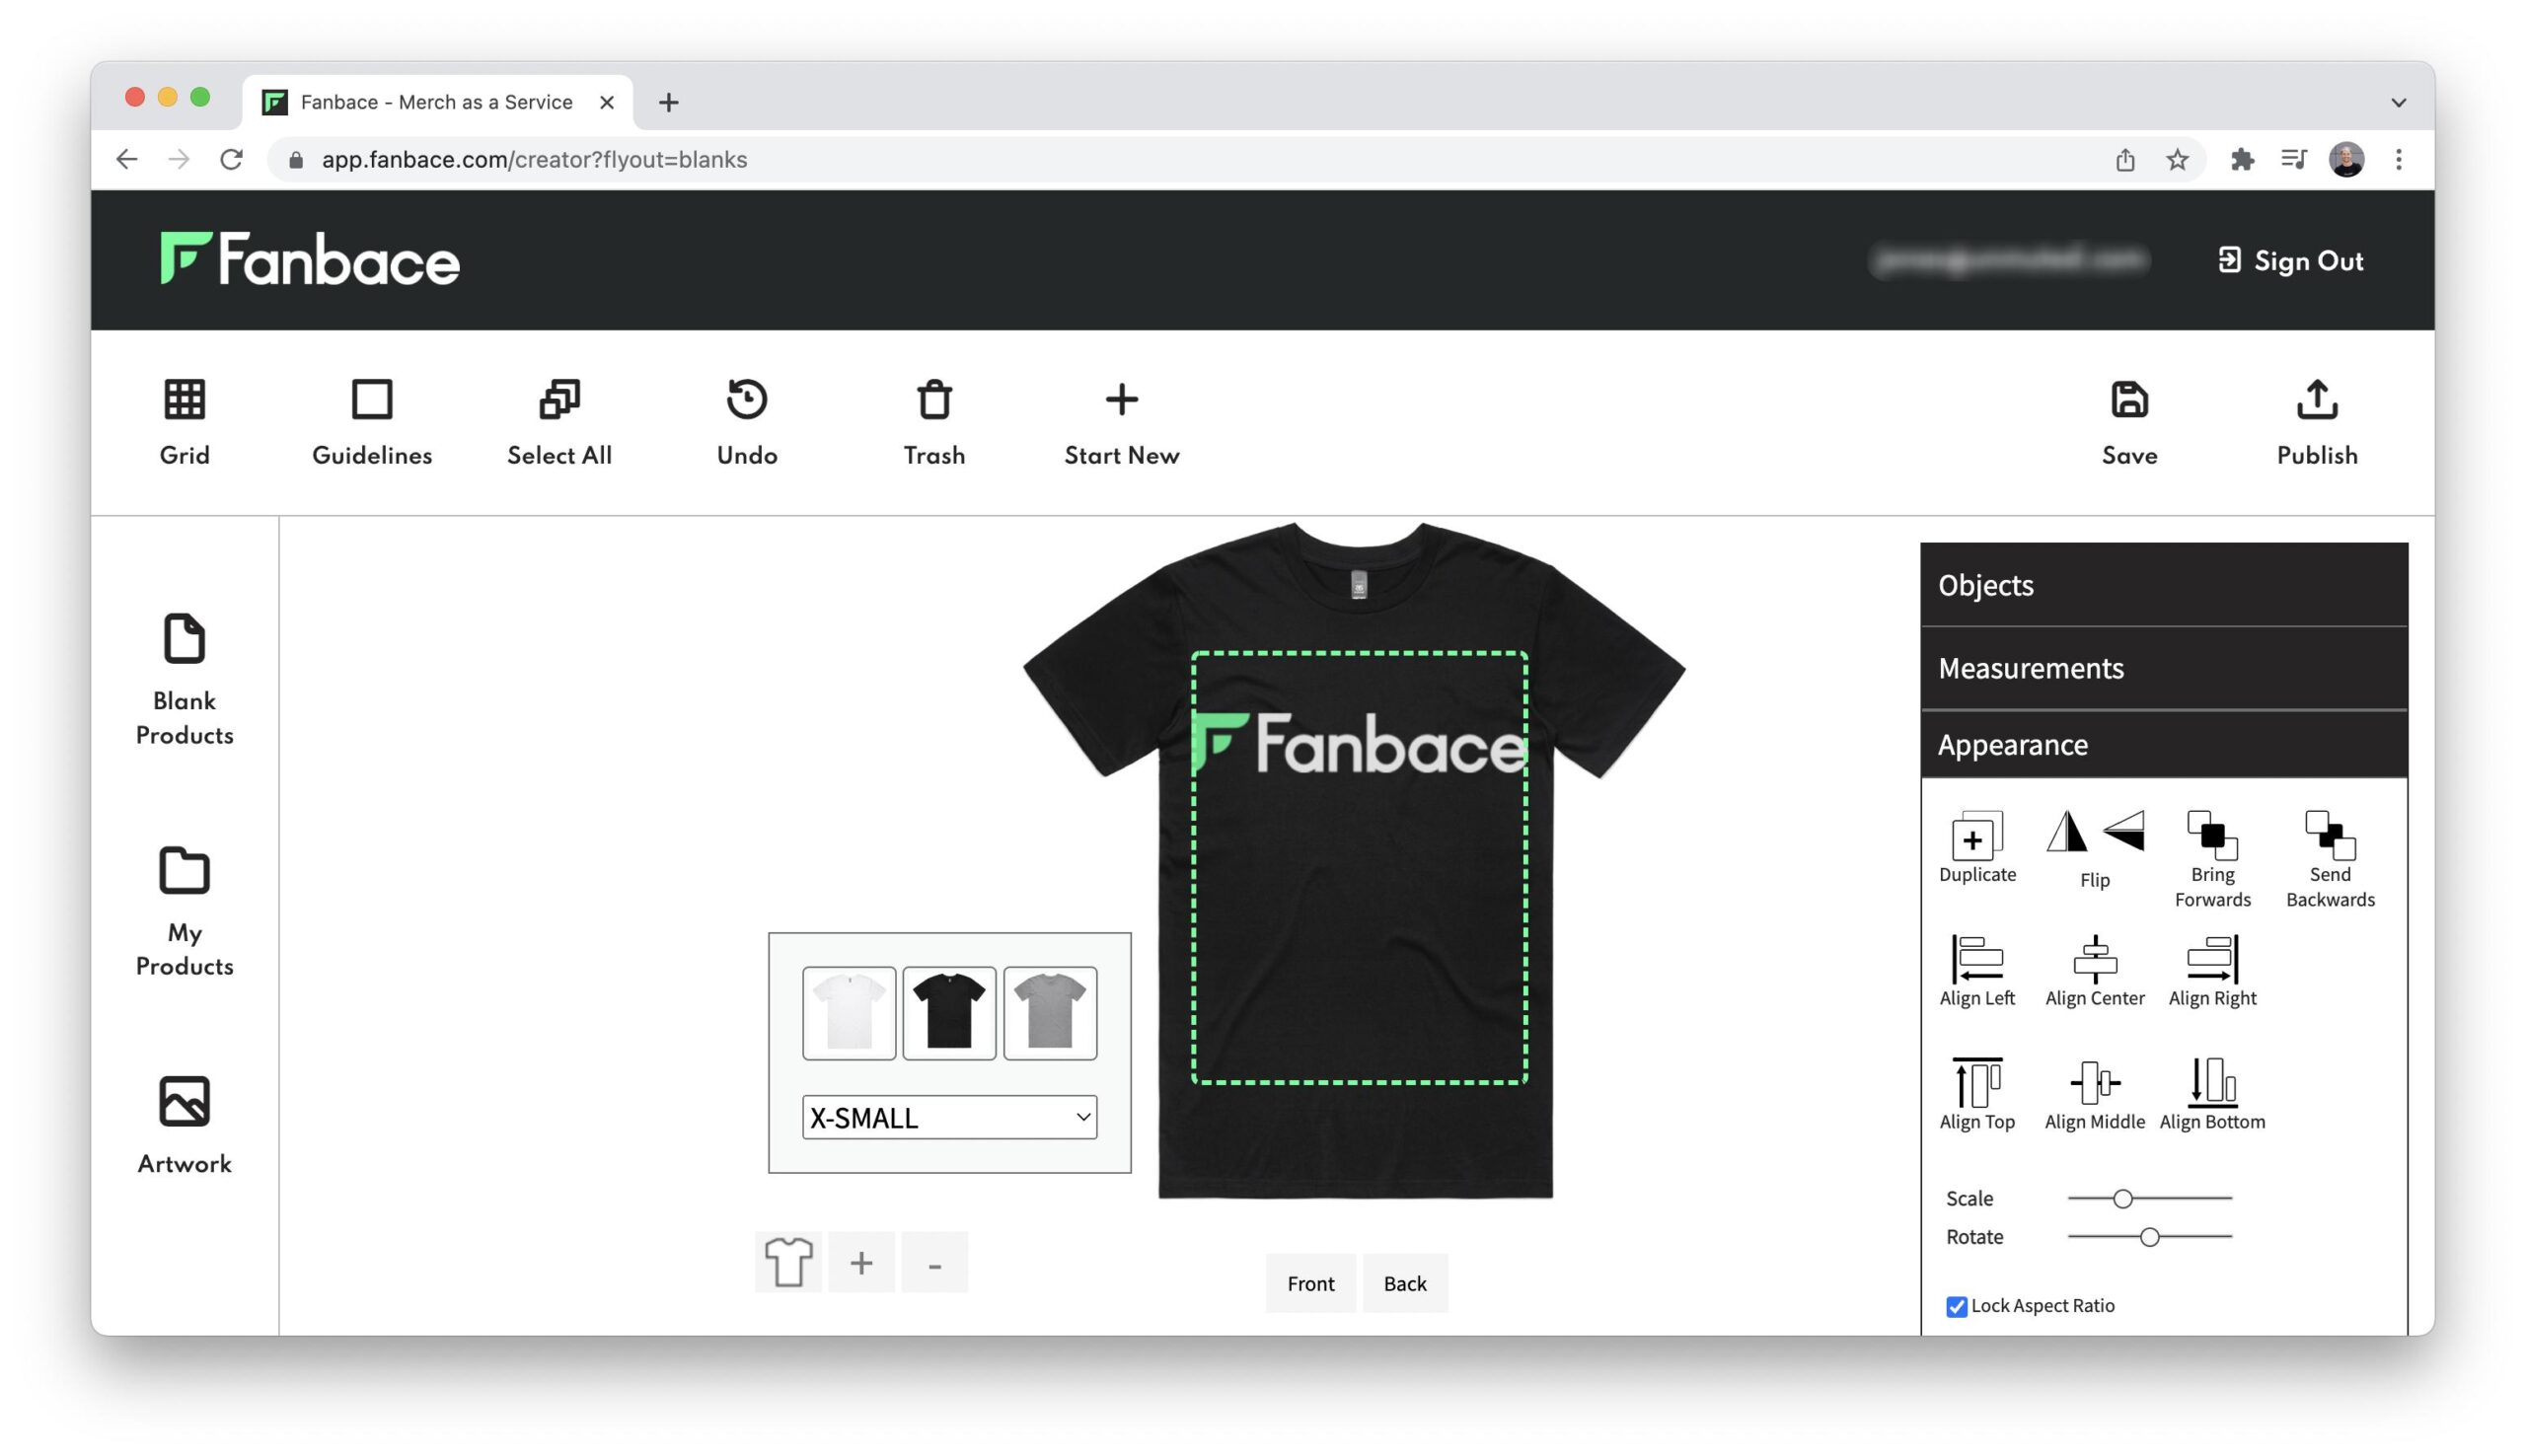 Fanbace-Merch-as-a-Service-Designing-Your-First-Product